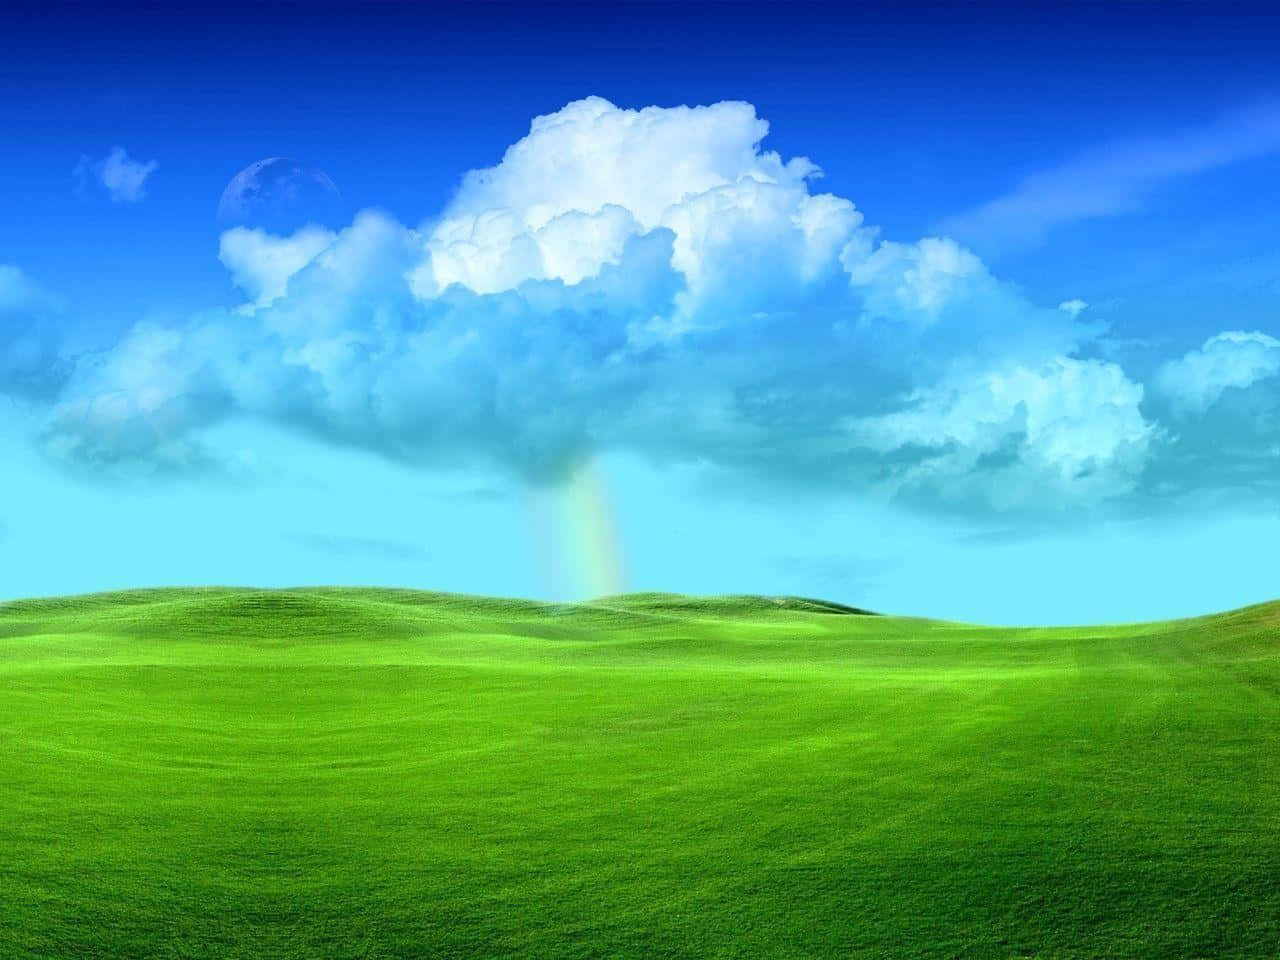 Enjoy the Simple and Colorful Design of Windows Vista